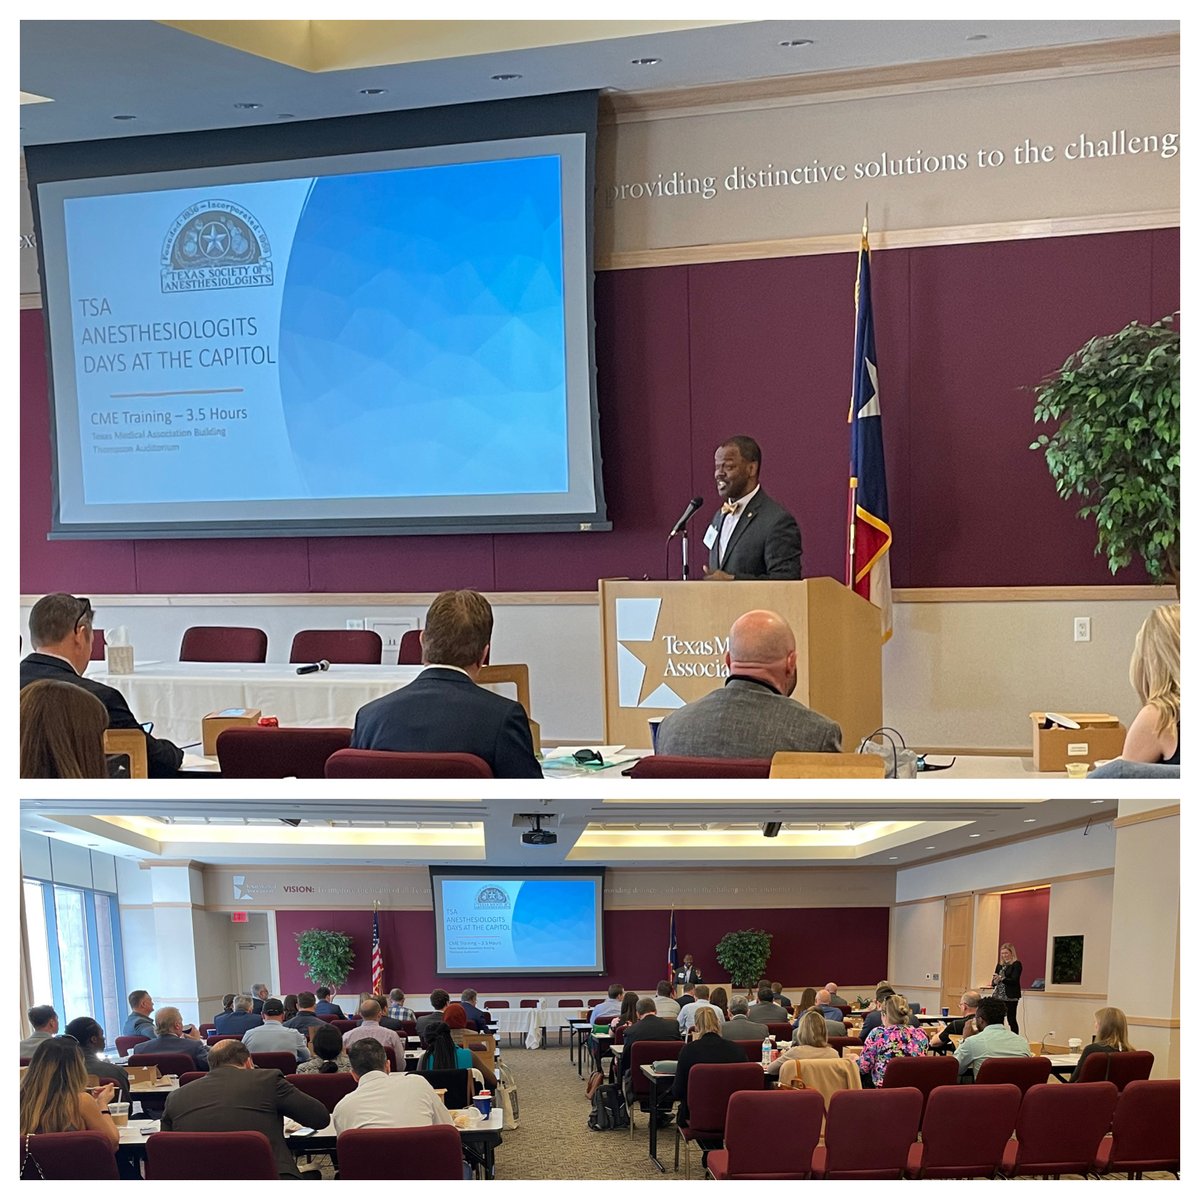 TSA Anesthesiologists Days at the Capitol happening now in Austin! Thank you for welcoming all attendees @dr_g_williams! @GovtAffairsTsa #txlege